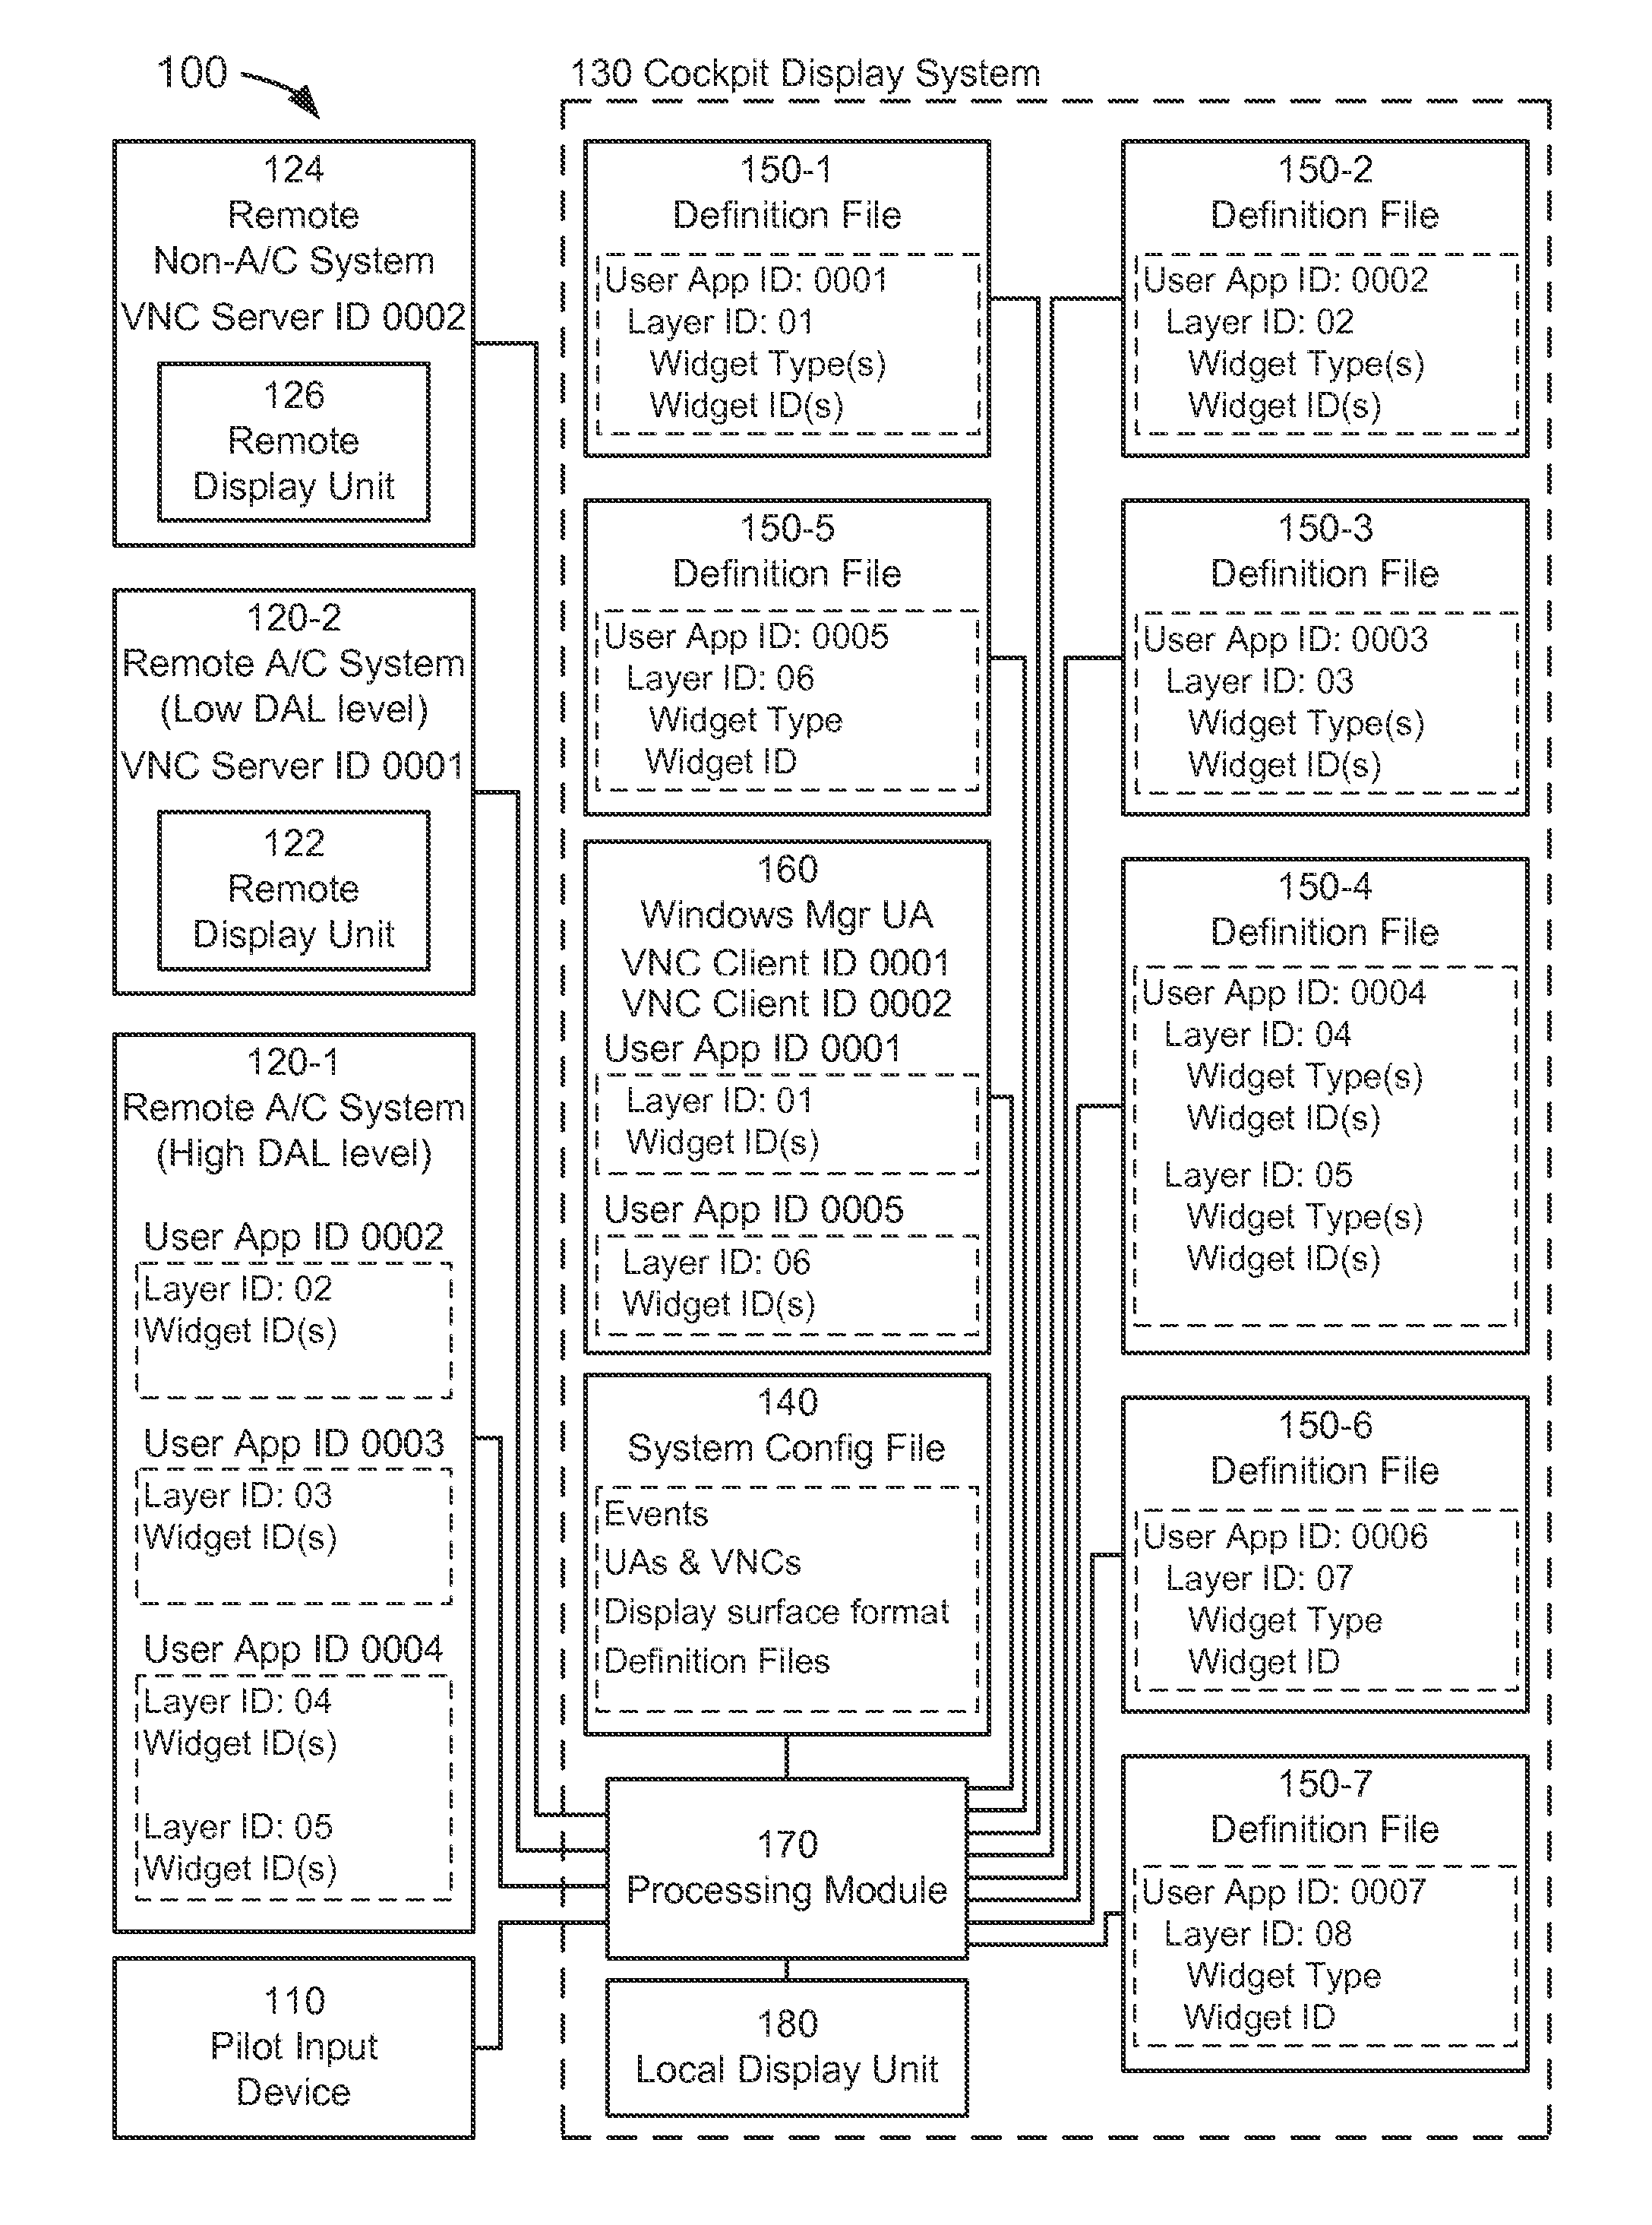 Incorporating virtual network computing into a cockpit display system for controlling a non-aircraft system